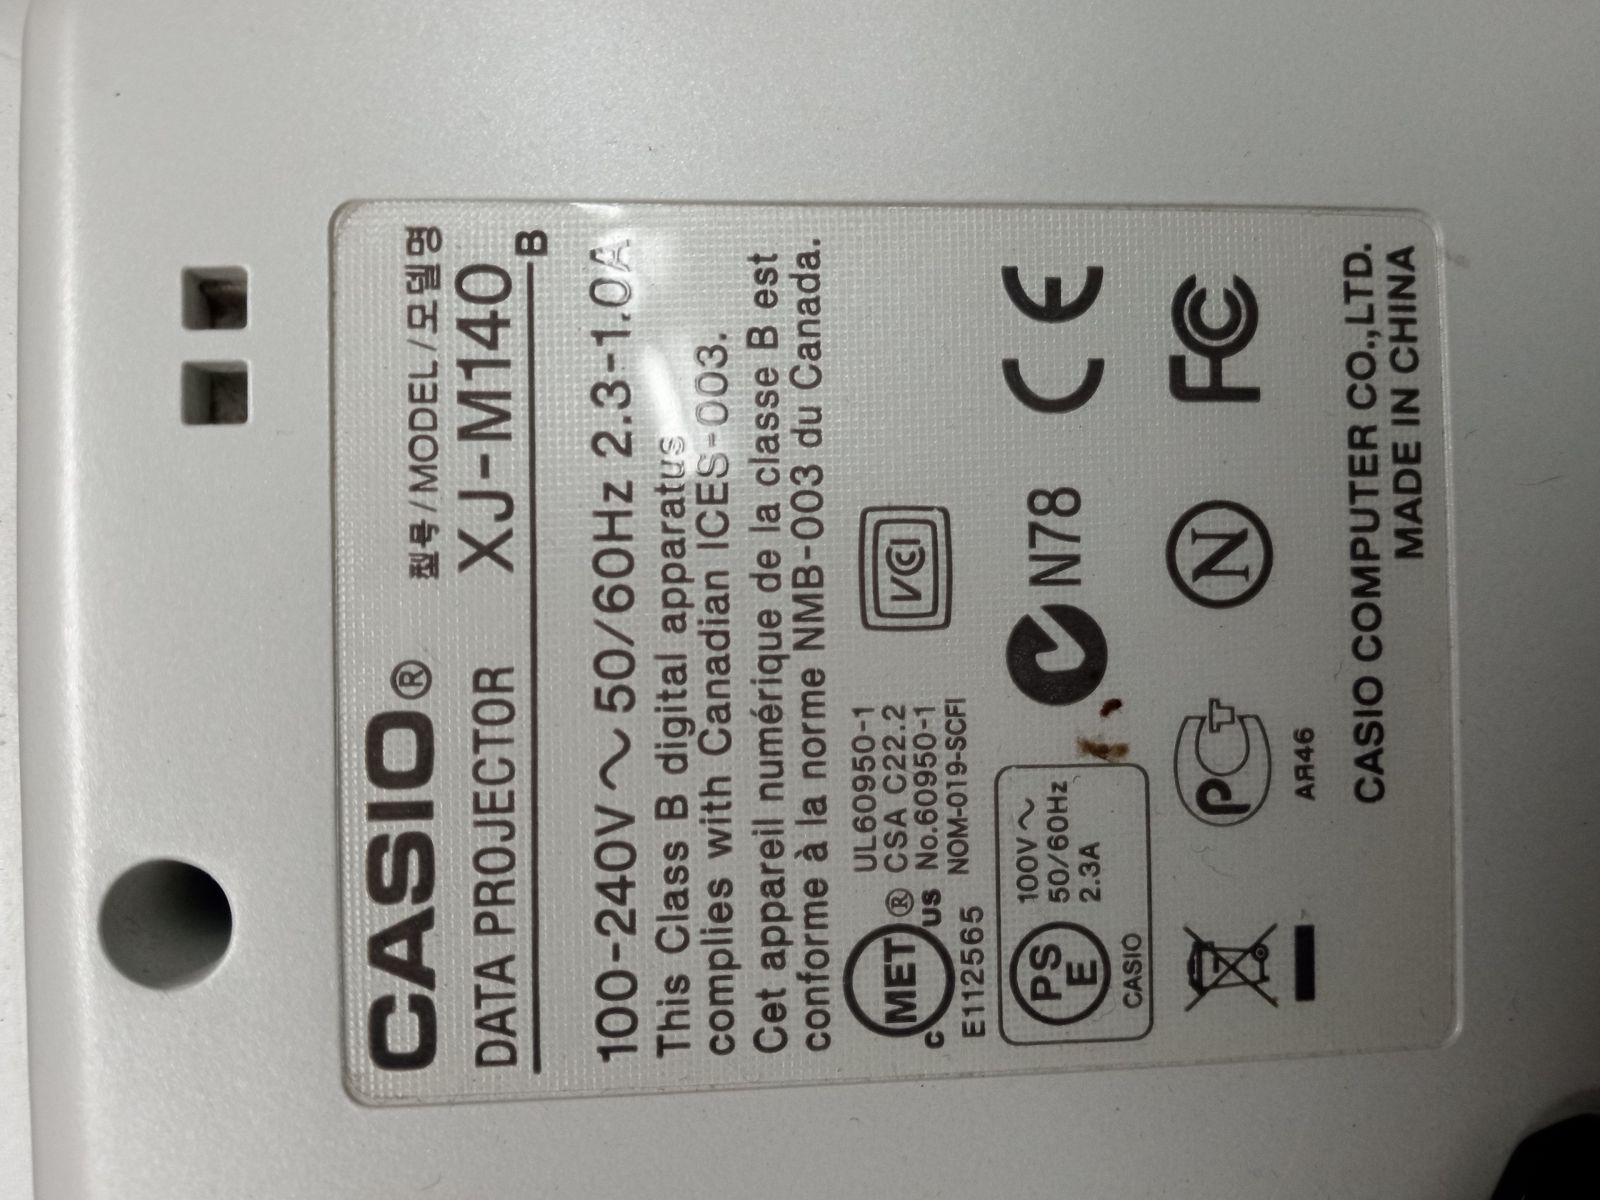 An image of the spec label on the Casio projector.